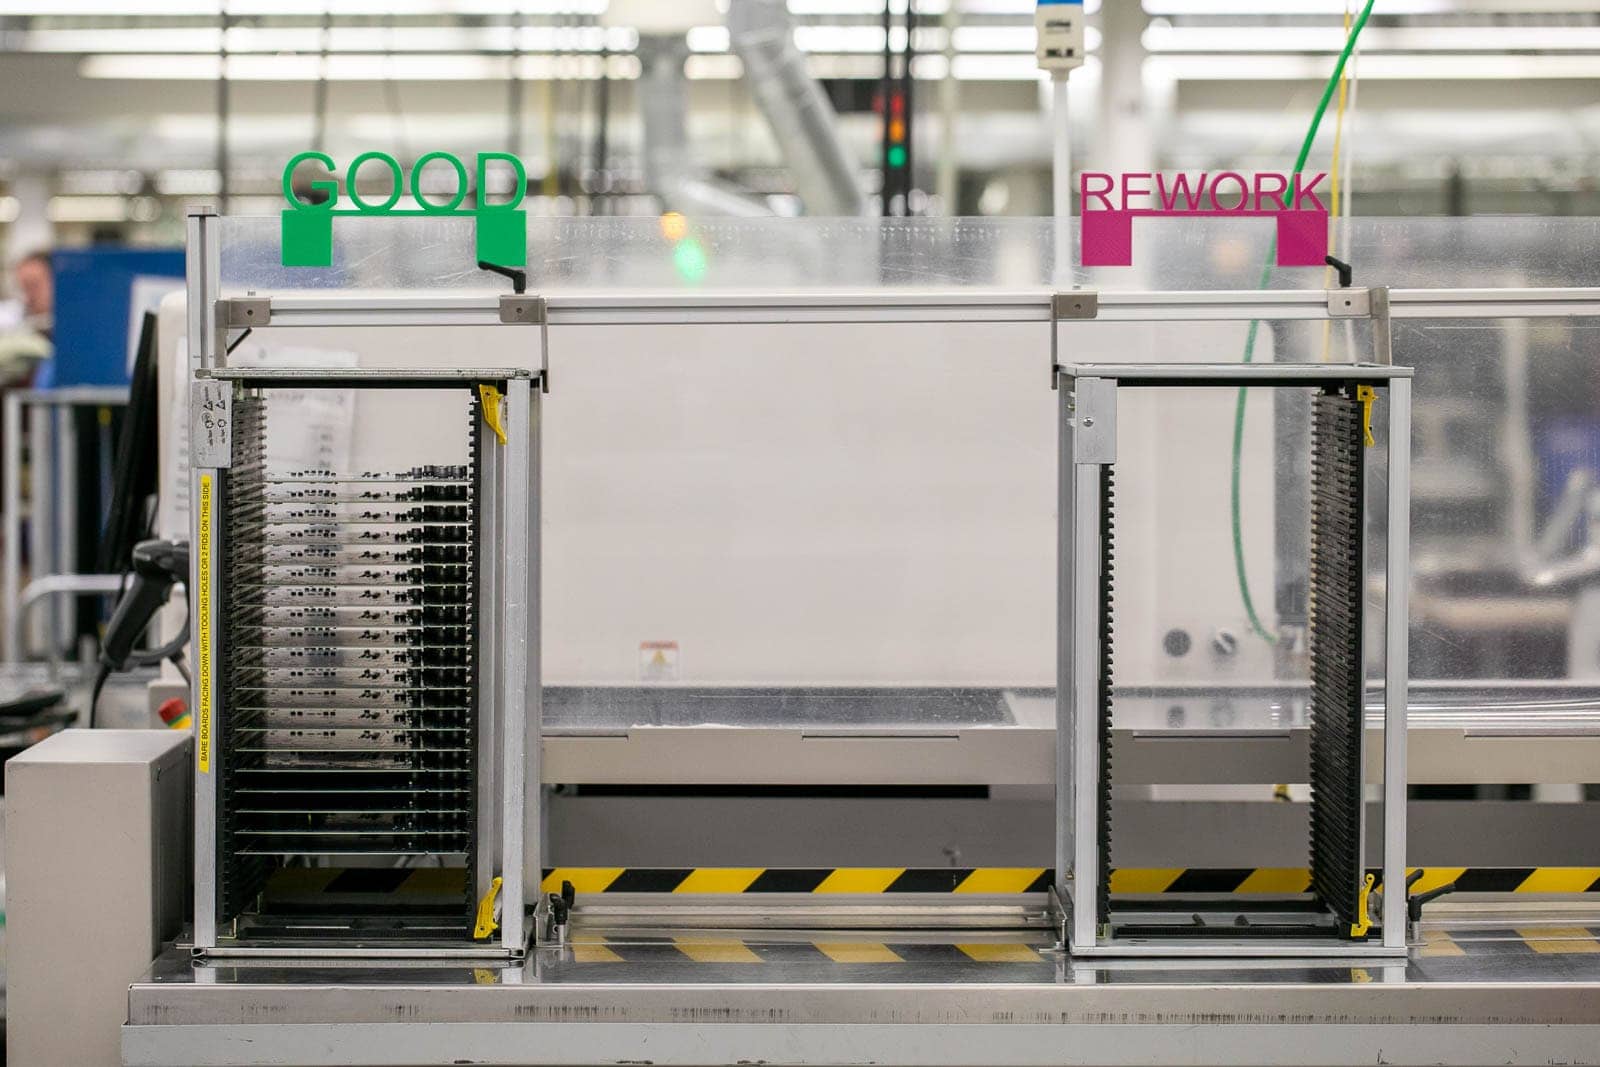 The end of an SMT line at RIS showing the auto-sorting system of good and rework boards. This automated system saves time and adds efficiency to our SMT process. It also means that workers don't need to physically touch any of the boards while transporting them to the next part of the process.